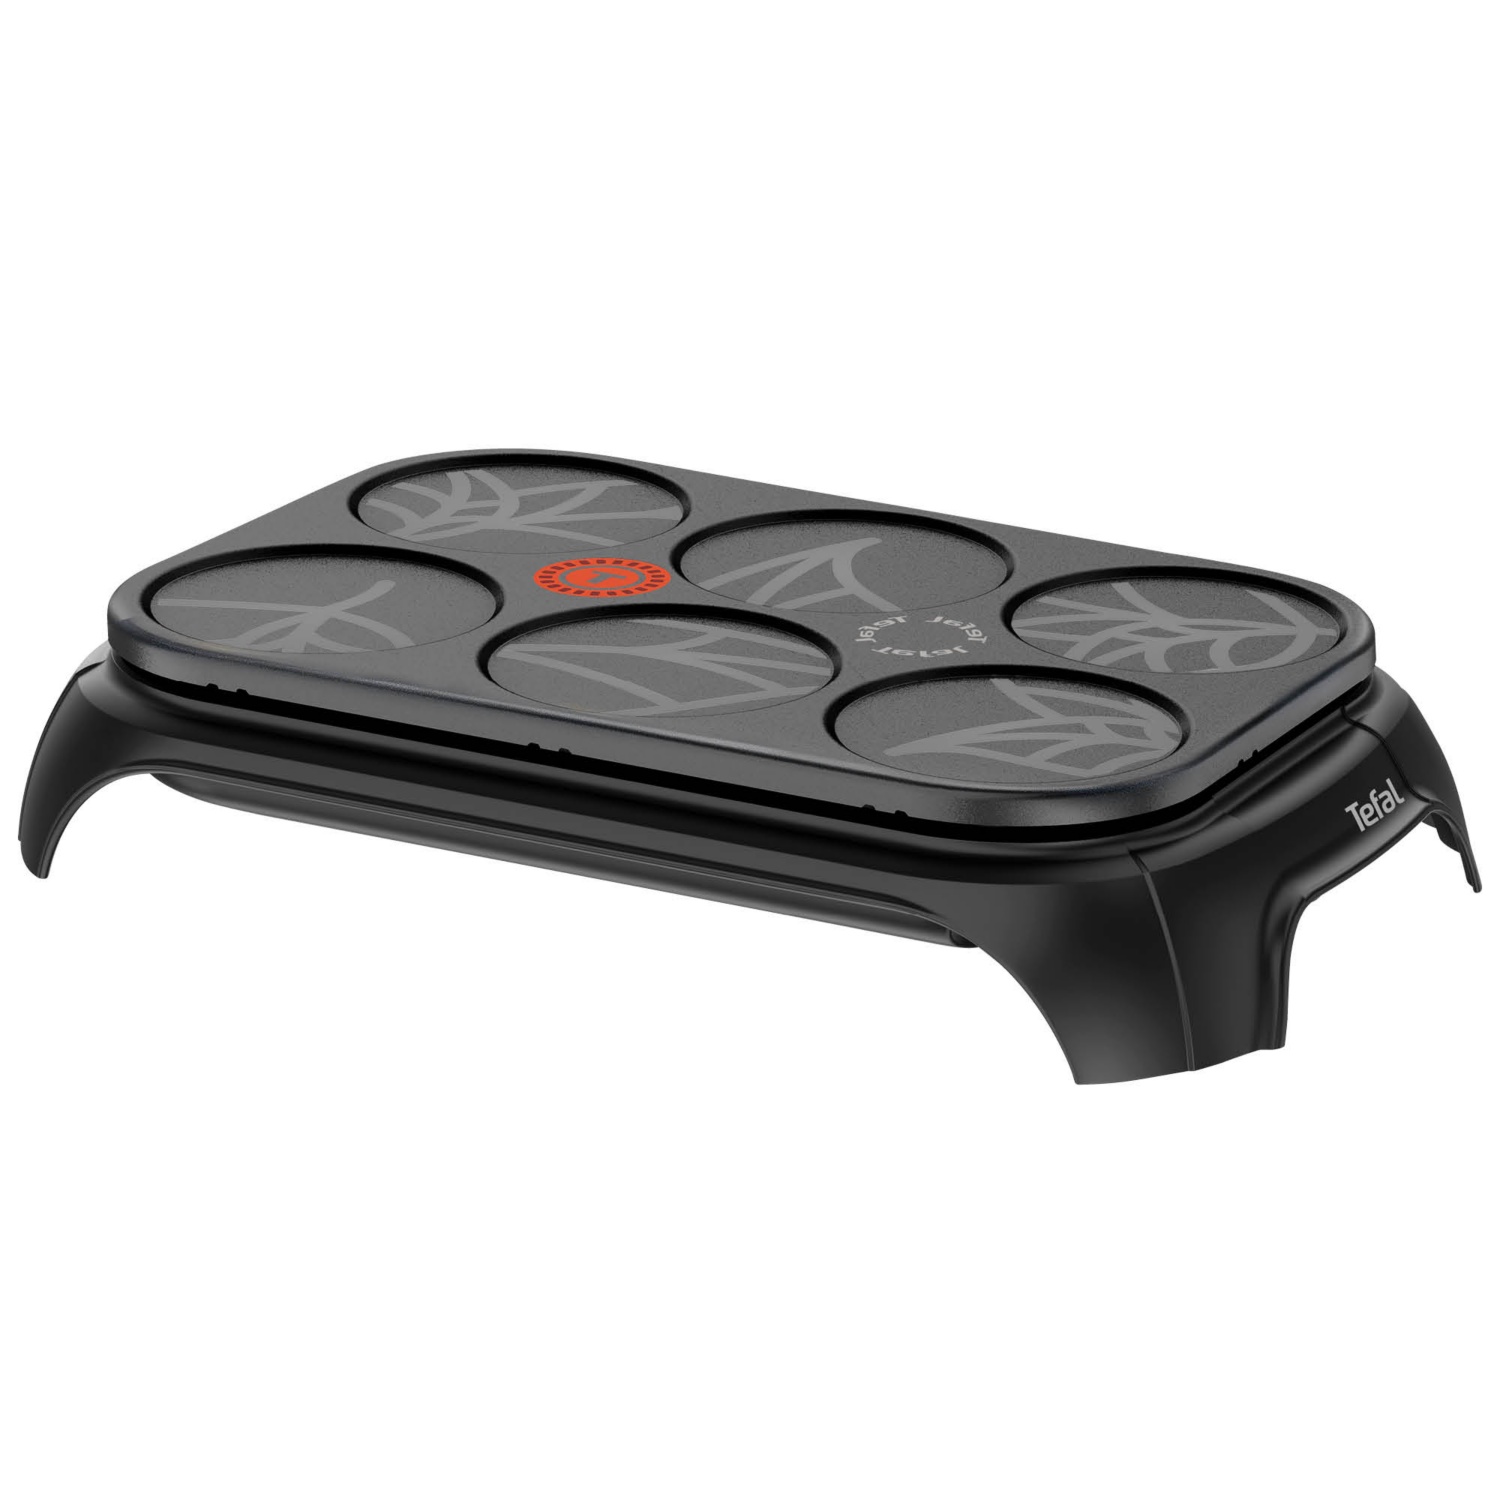 TEFAL Gourmet Party crepes e wok 2 in 1